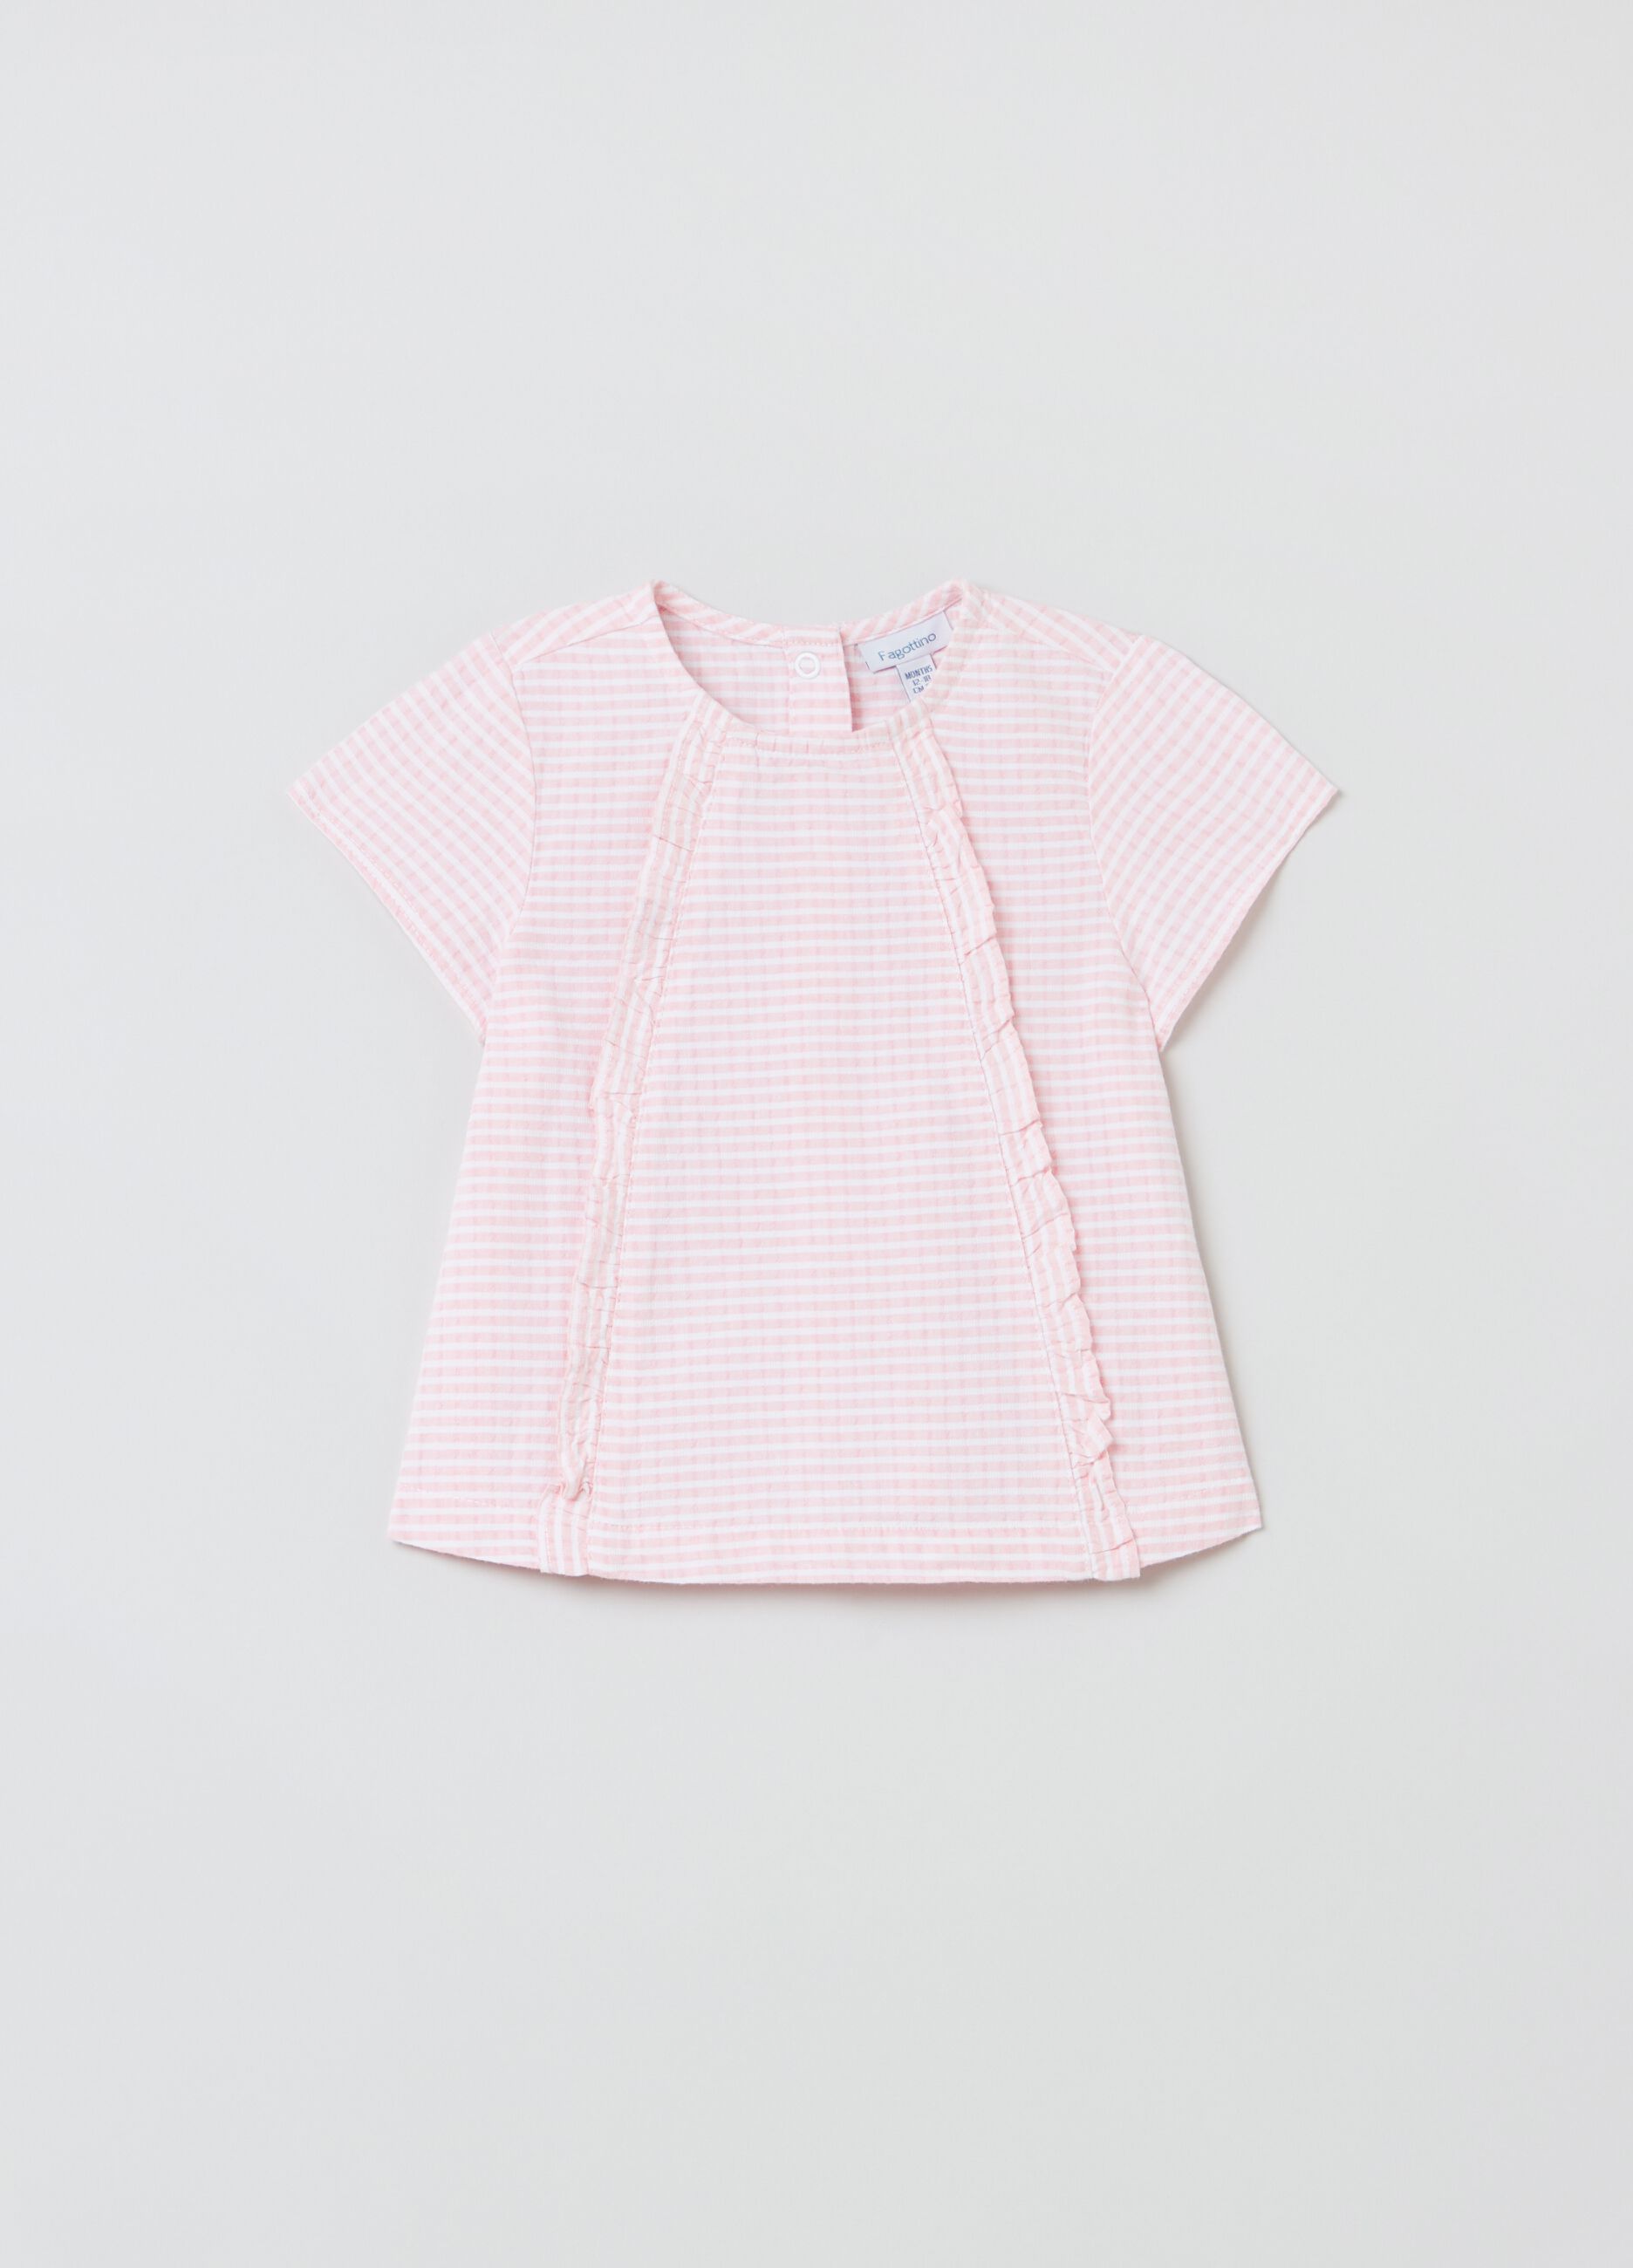 Cotton blouse with gingham pattern